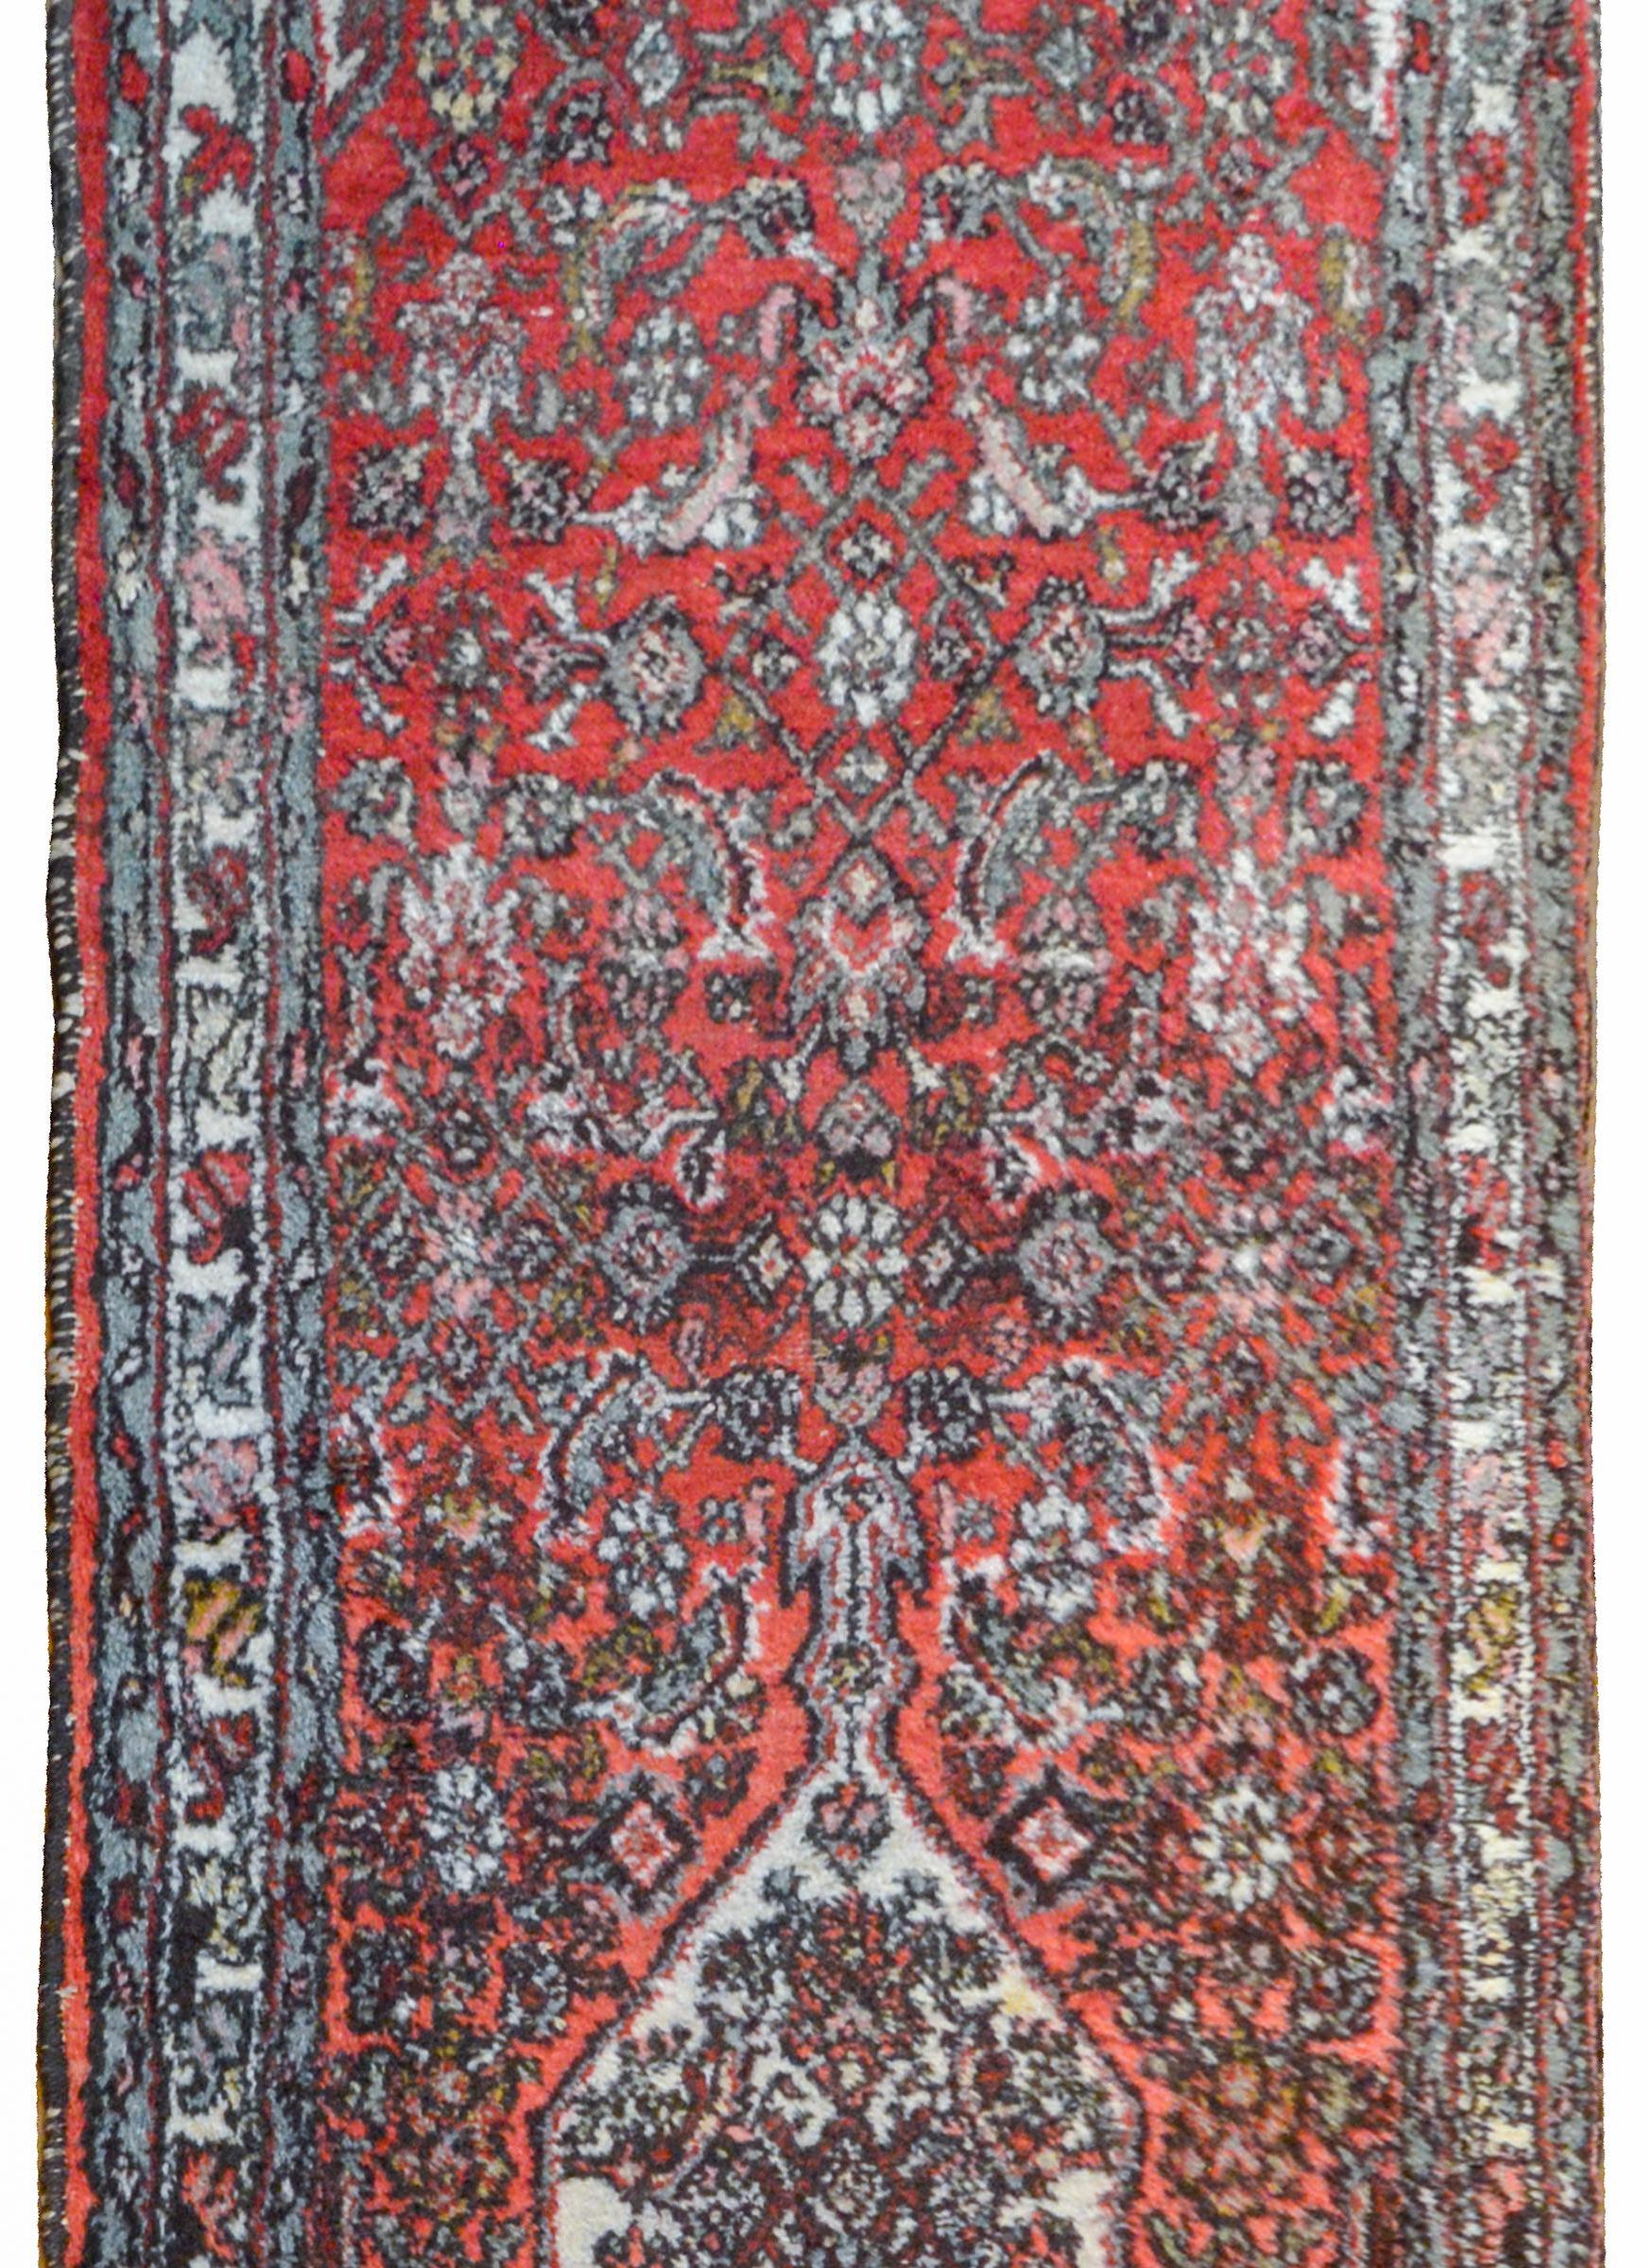 A wonderful early 20th century Hamadan runner with a large diamond medallion amidst a field of floral trellis on a coral background surrounded by a floral and leaf patterned border flanked by a pair of petite patterned floral stripes.